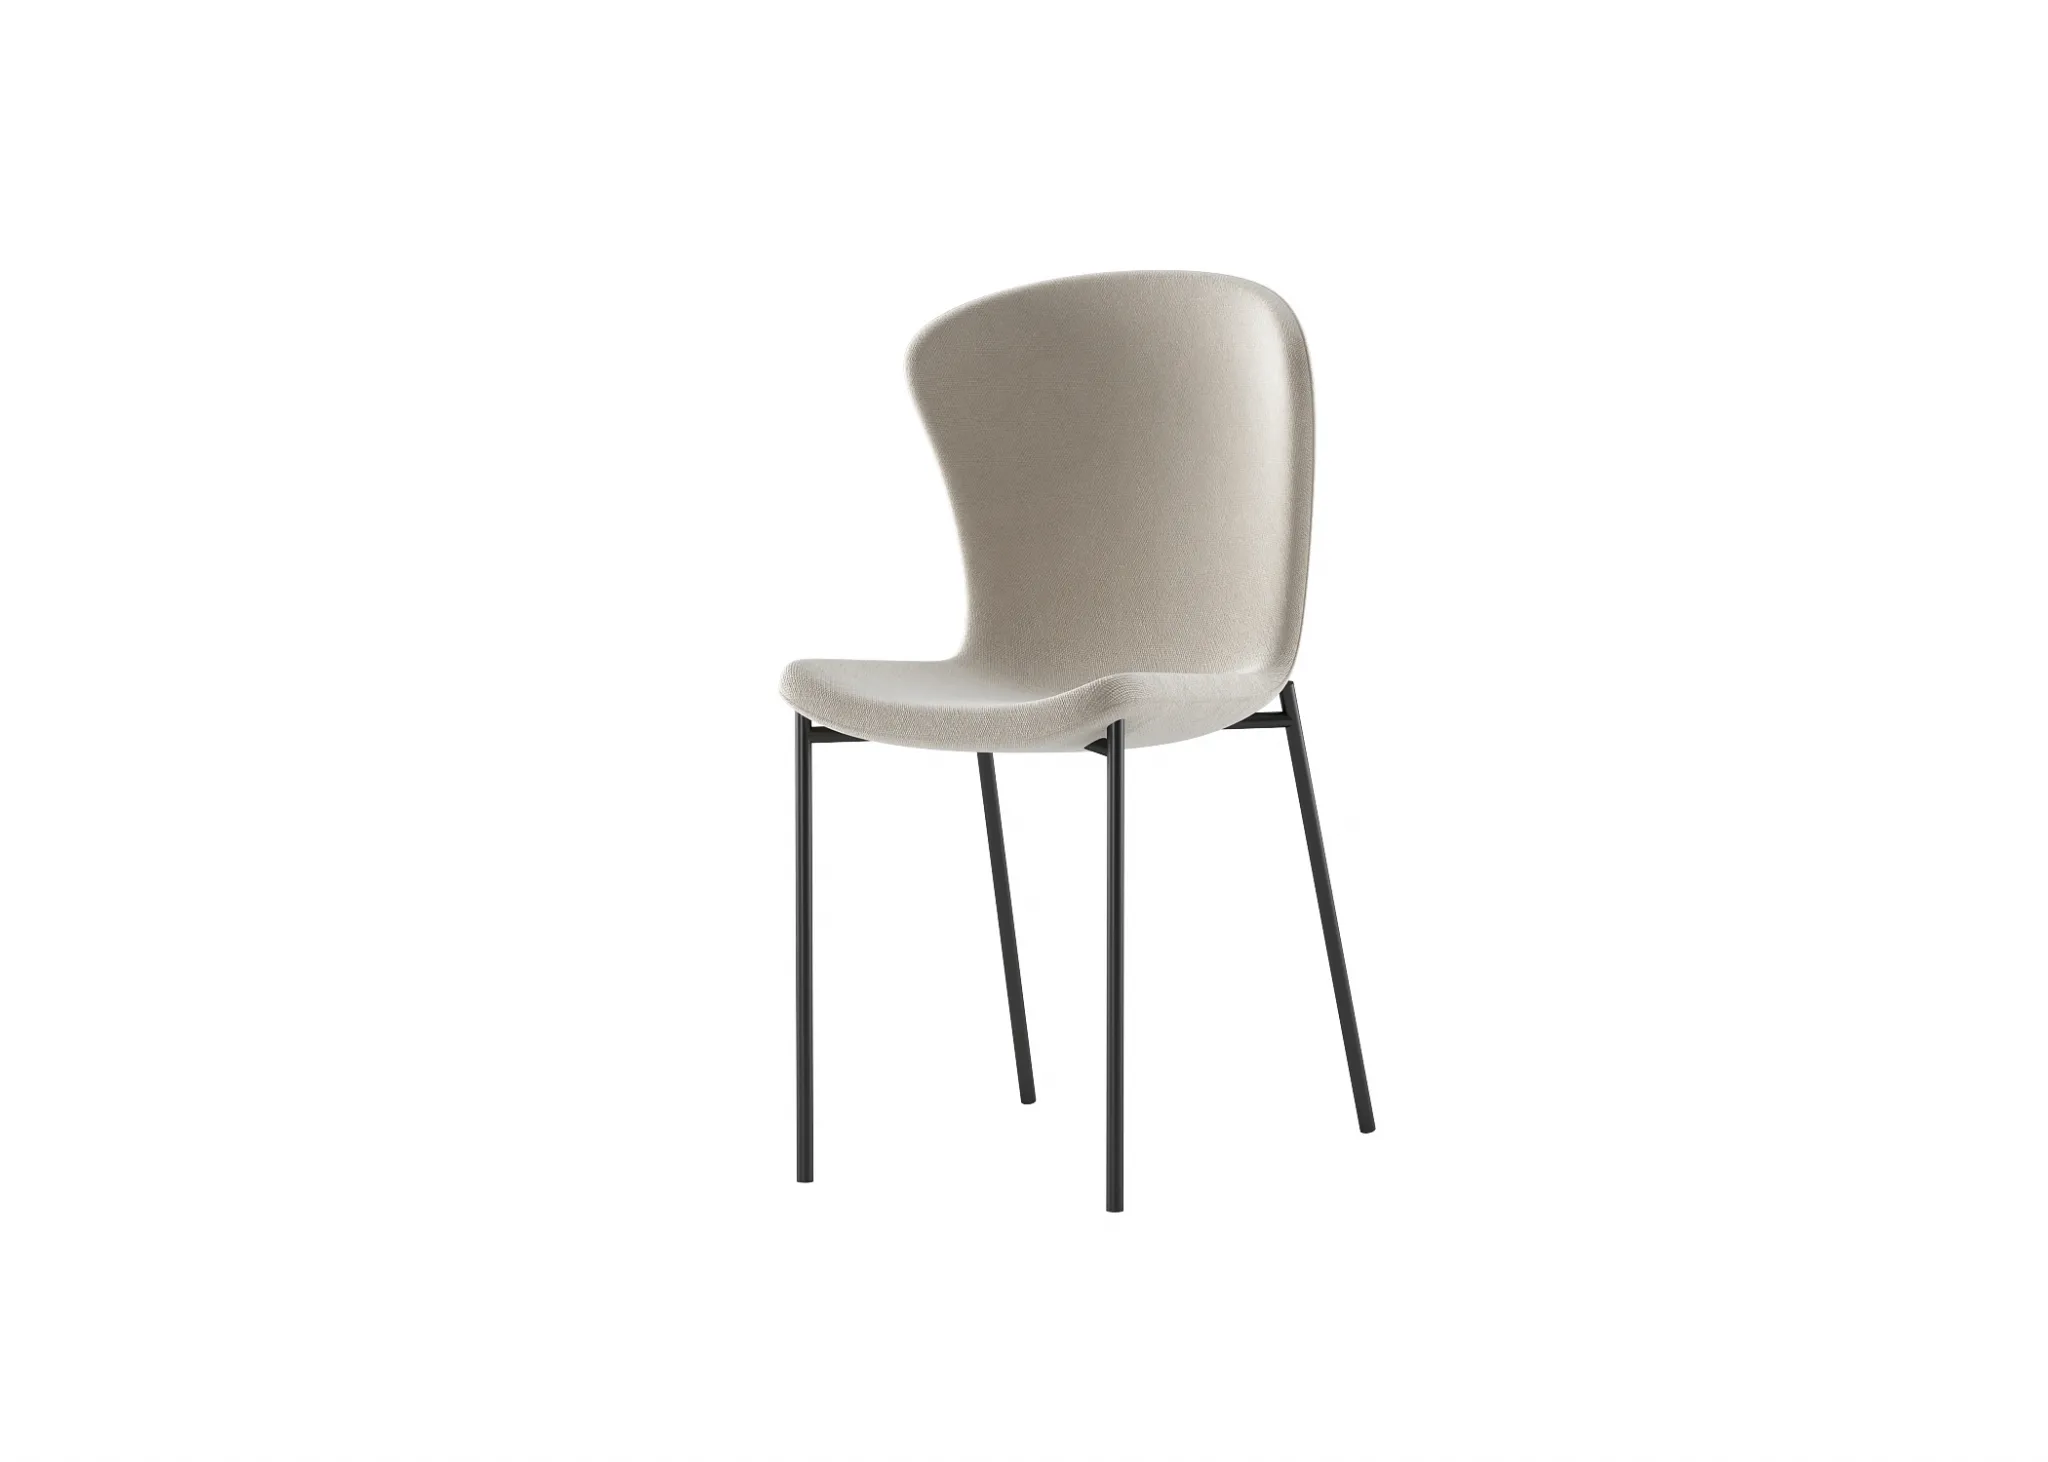 FURNITURE 3D MODELS – CHAIRS – 0404